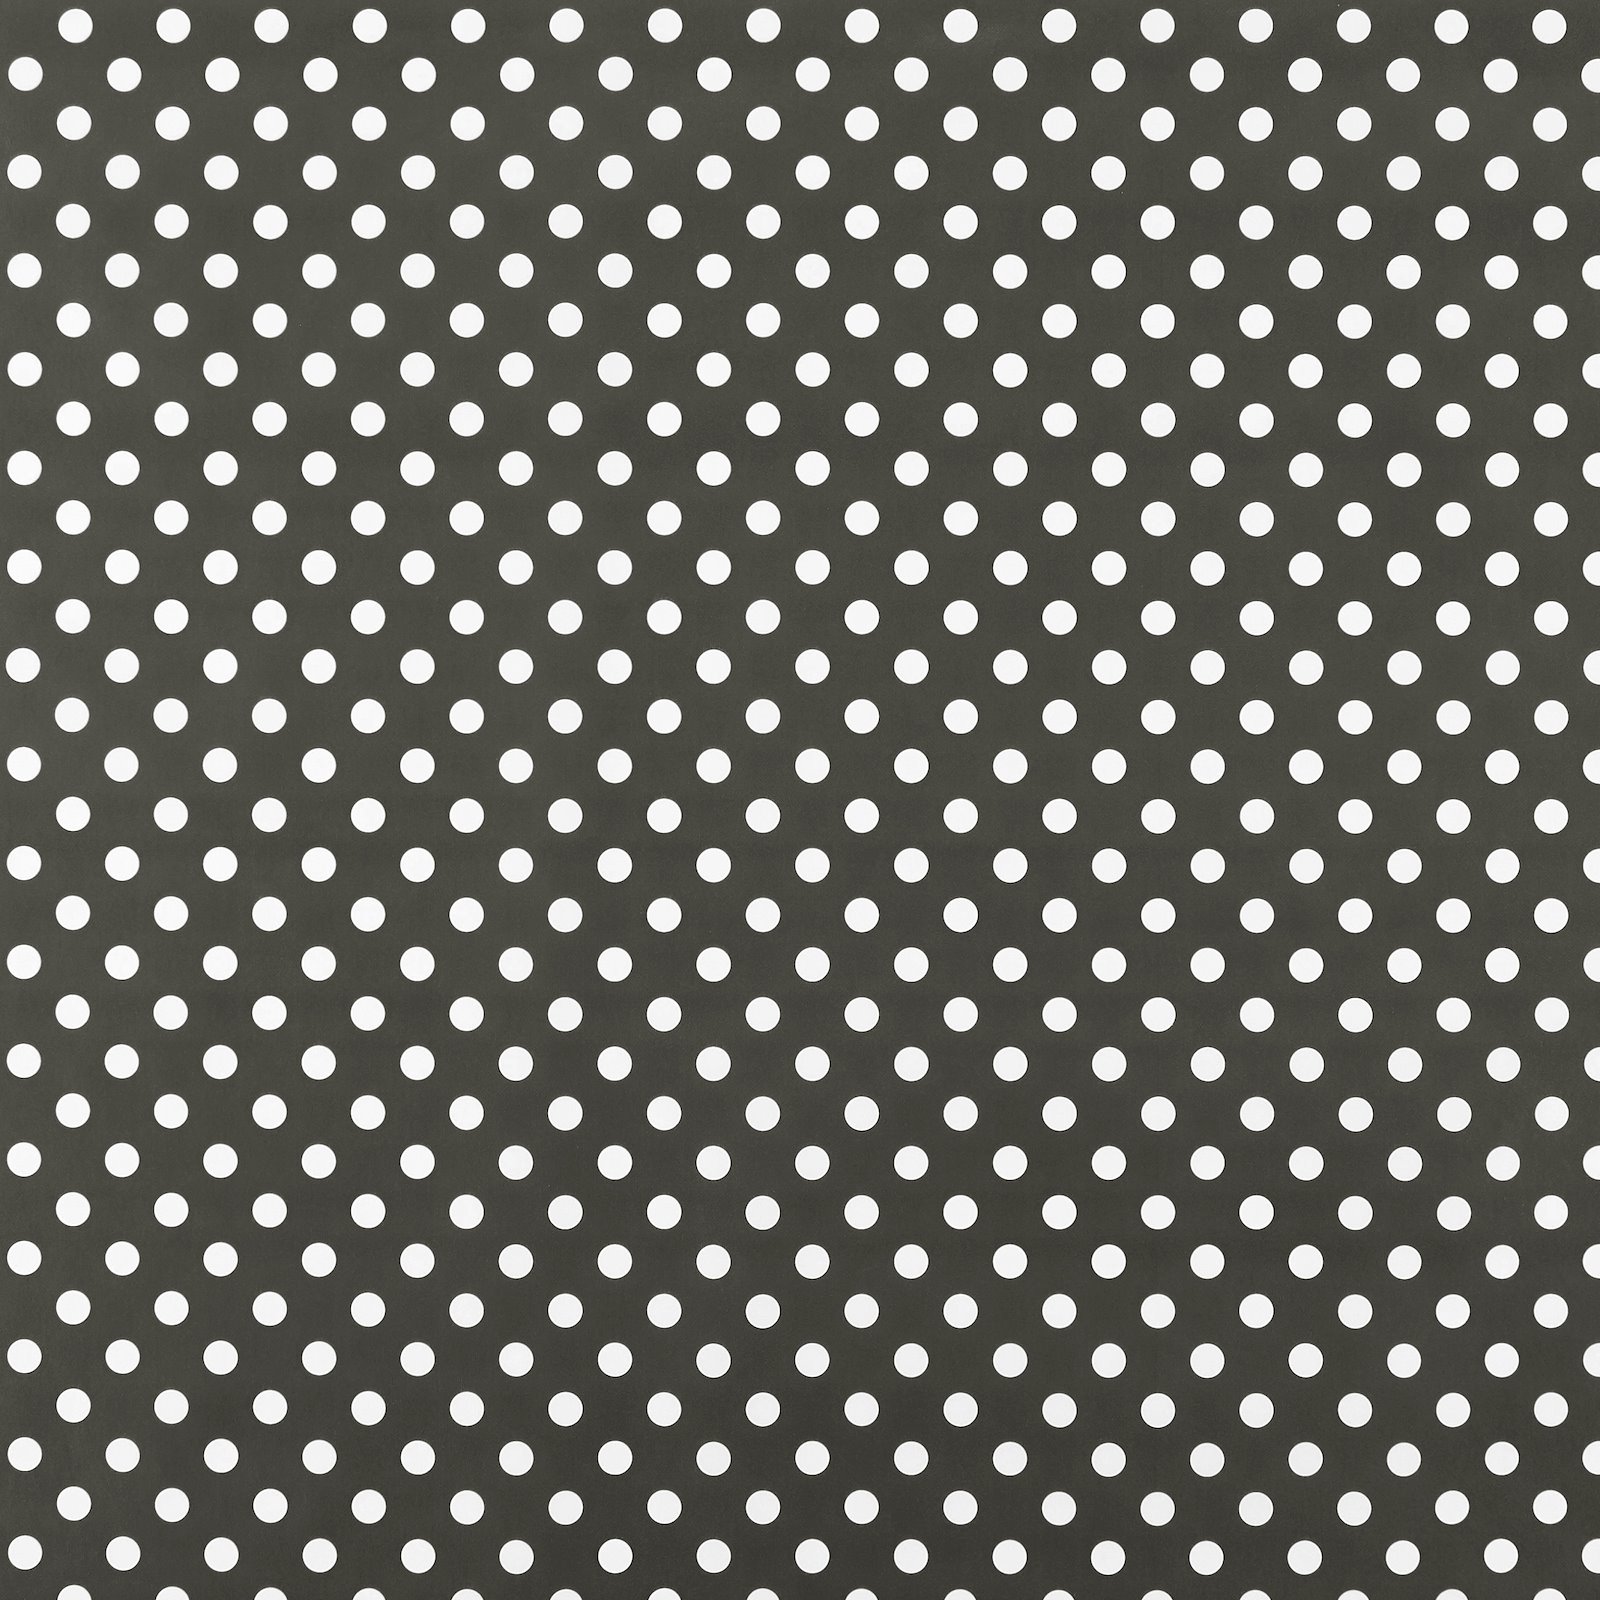 Non-woven oilcloth grey w white dots 861383_pack_sp